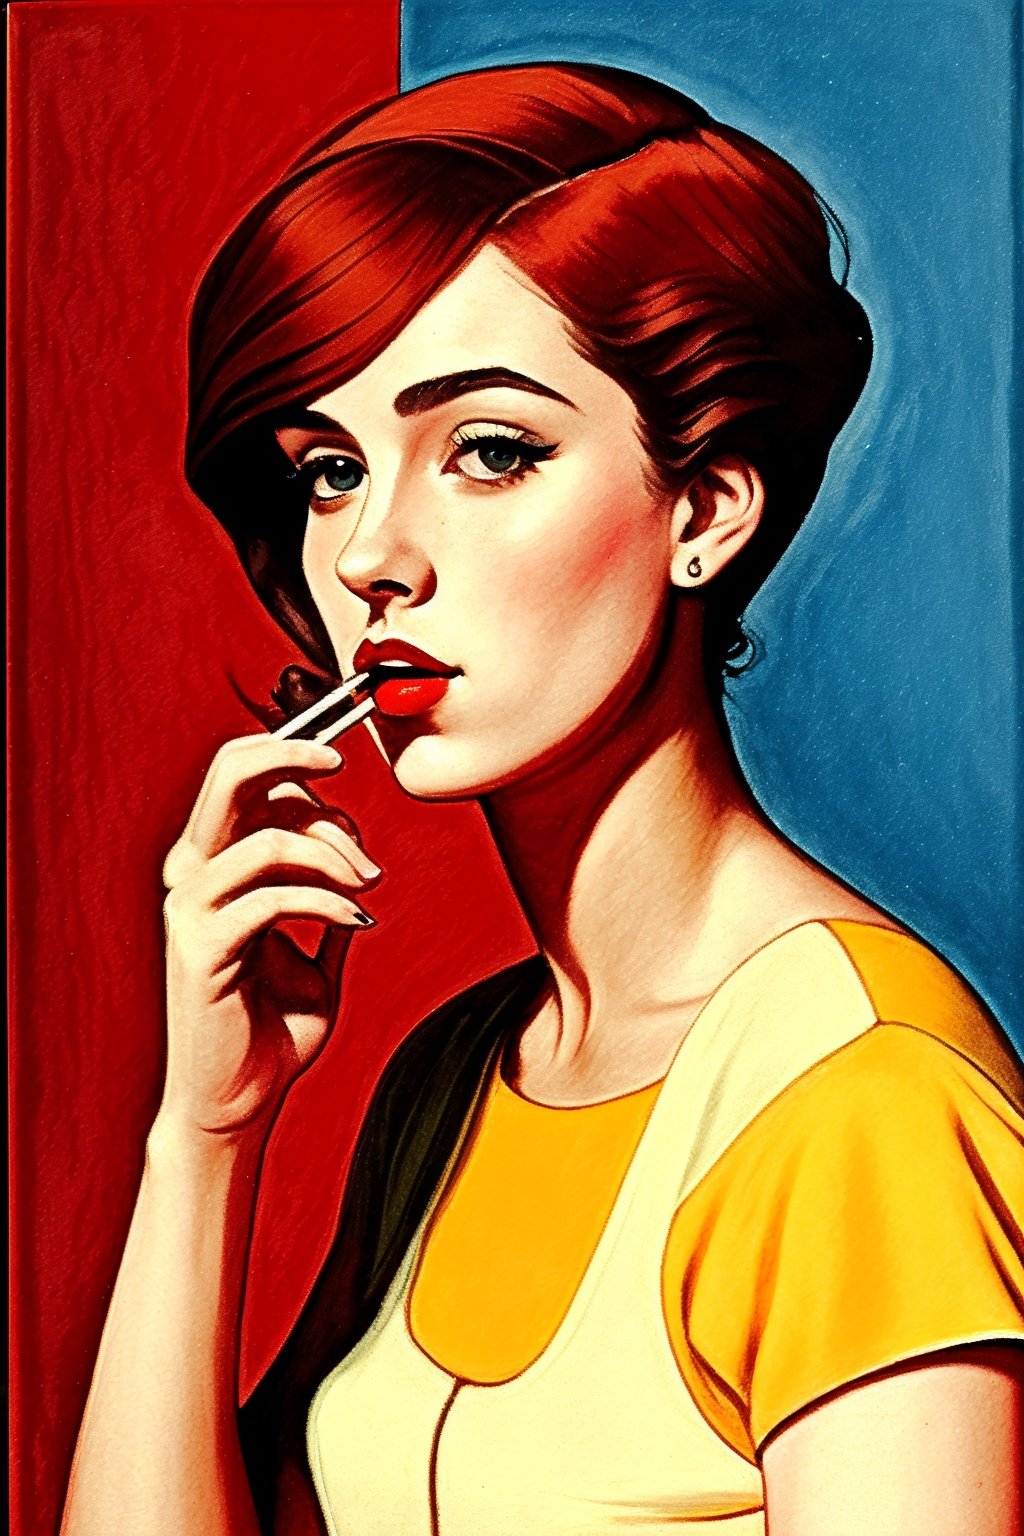 a painting in style are deco from the beginning of the XX century, a picture of a young beautiful lady smoking a cigarette, reddish and yellowish background,  